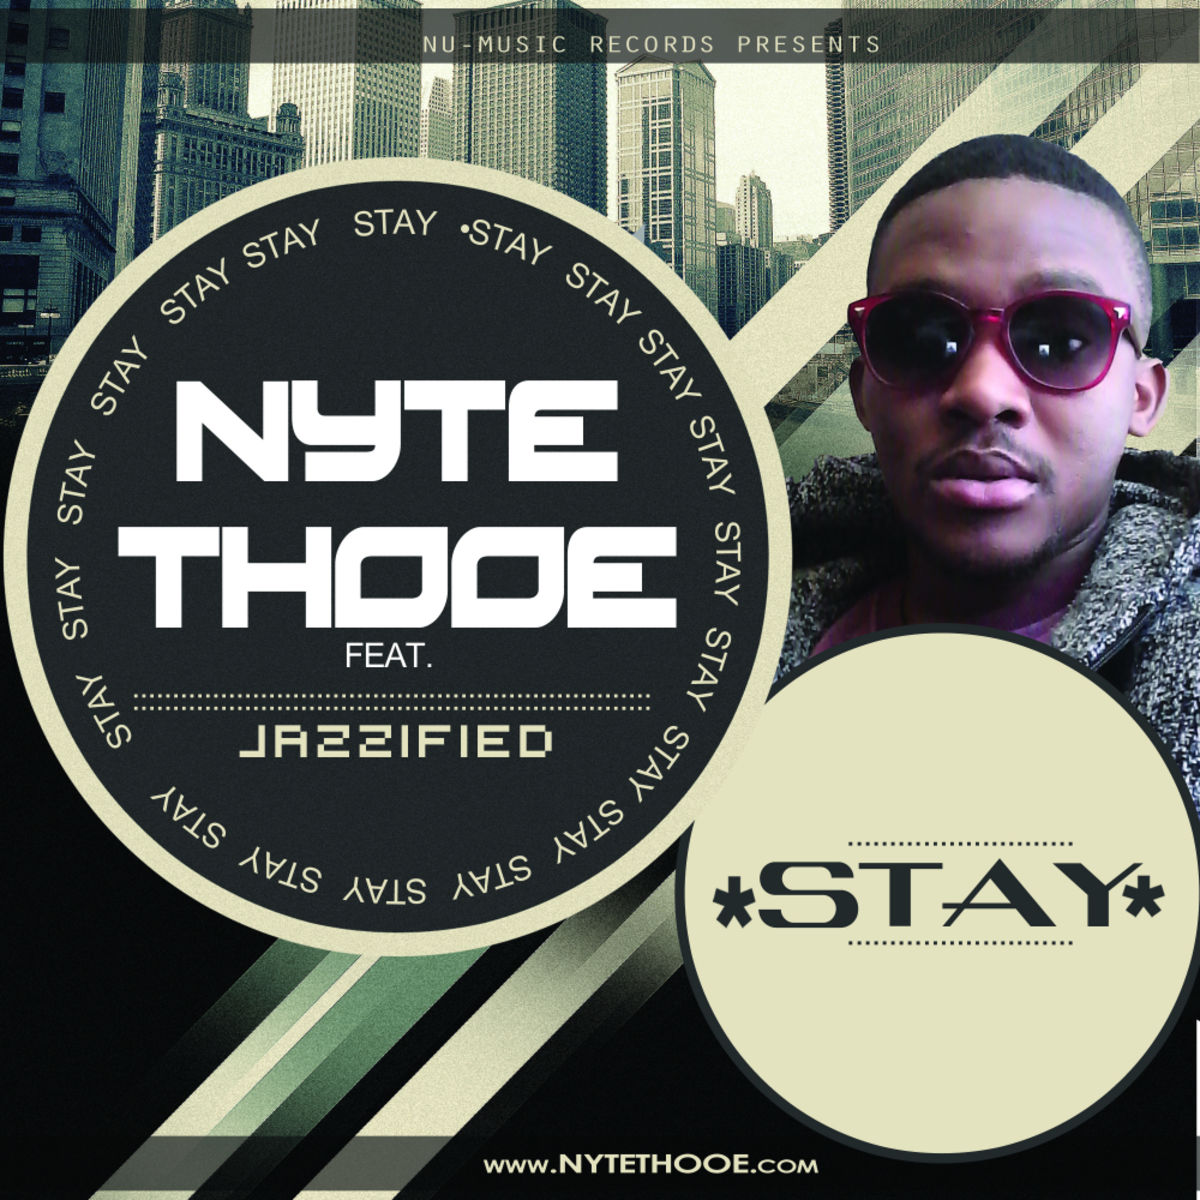 Nyte Thooe ft Jazzified - Stay / Nu-Music Records